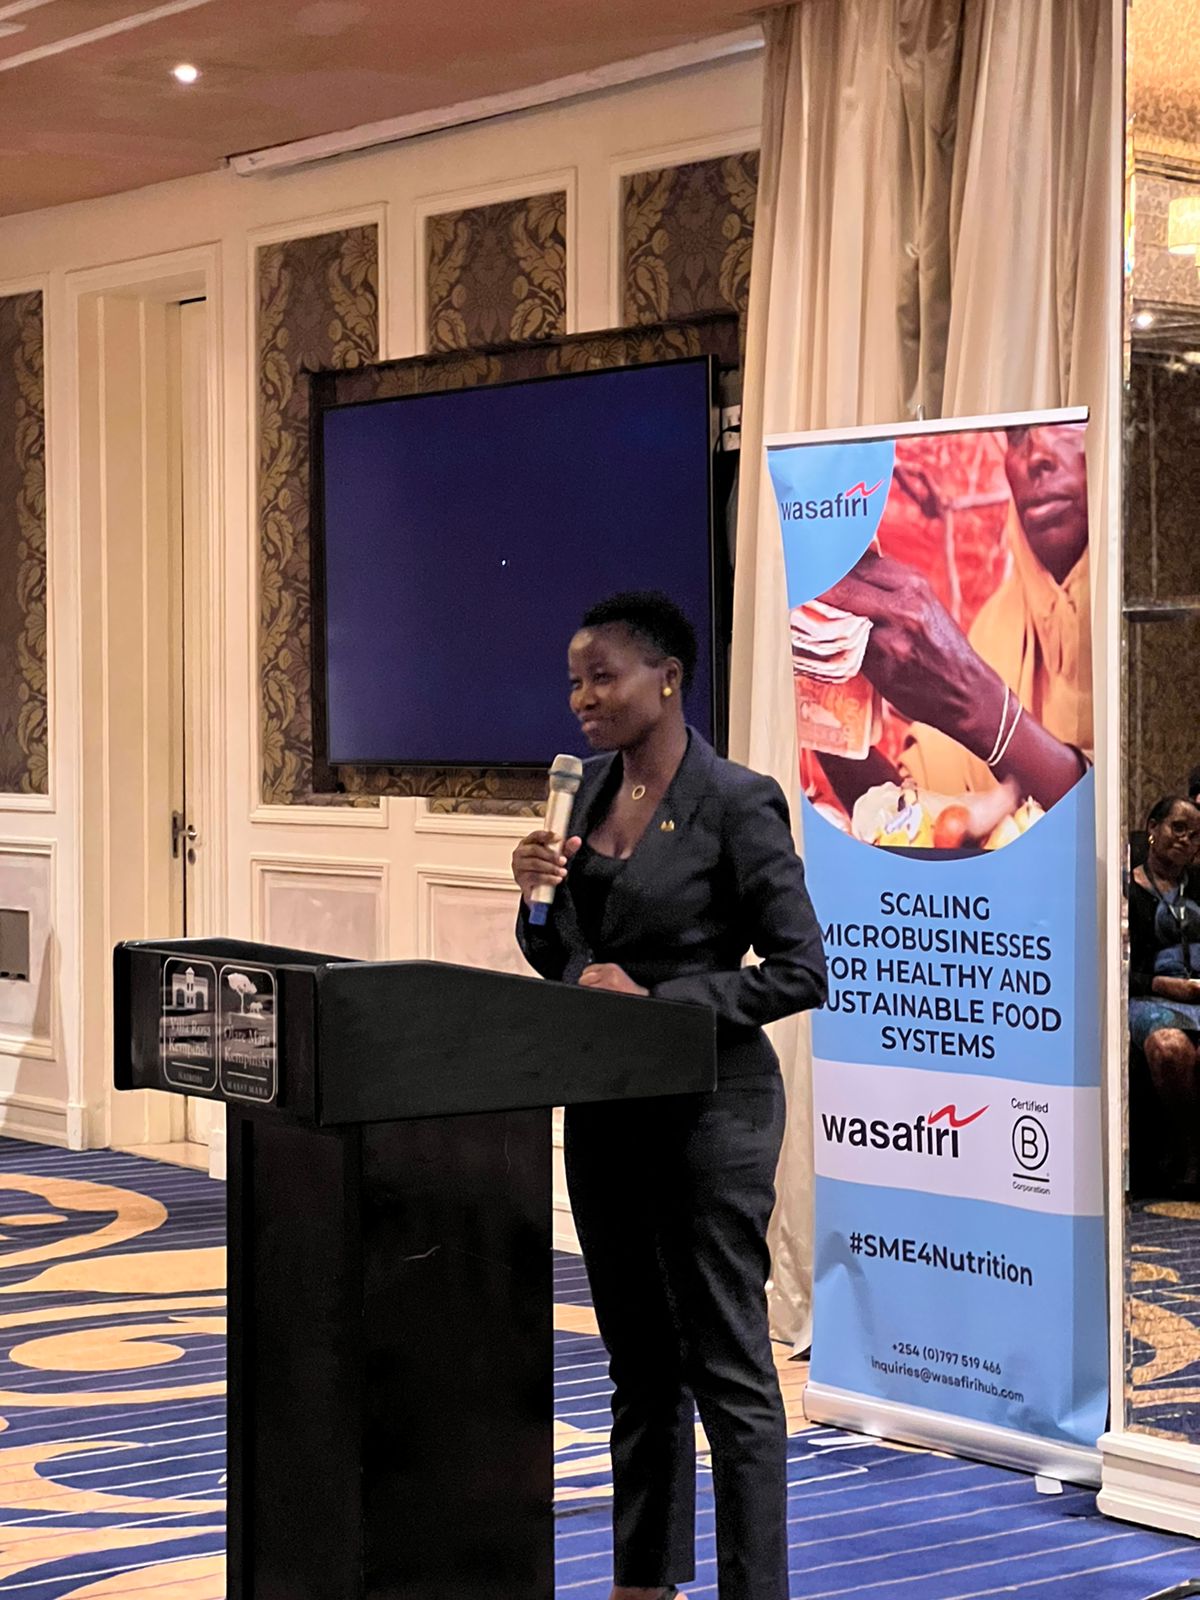 Susan Mang'eni, the Principal Secretary, State Department for MSMEs Development, Ministry of Cooperatives who was the chief guest at the SME4Nutrition Forum delivering her keynote address.